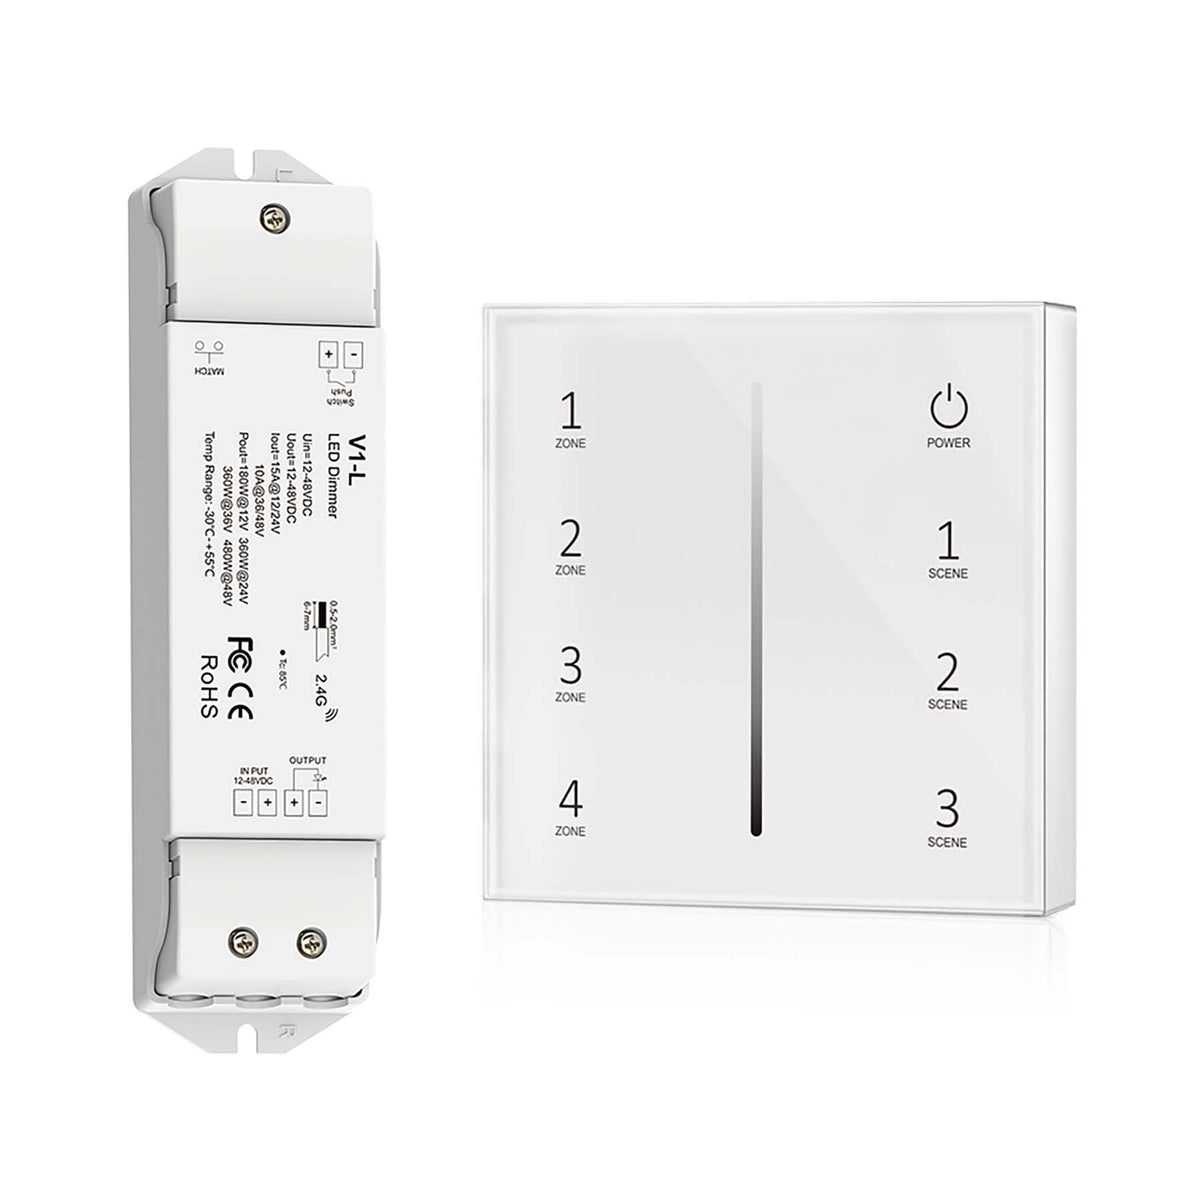 G.W.S. LED White LED 12-48V DC Dimming Controller V1-L + 4 Zone Panel Remote Control 2*AAA Battery T21